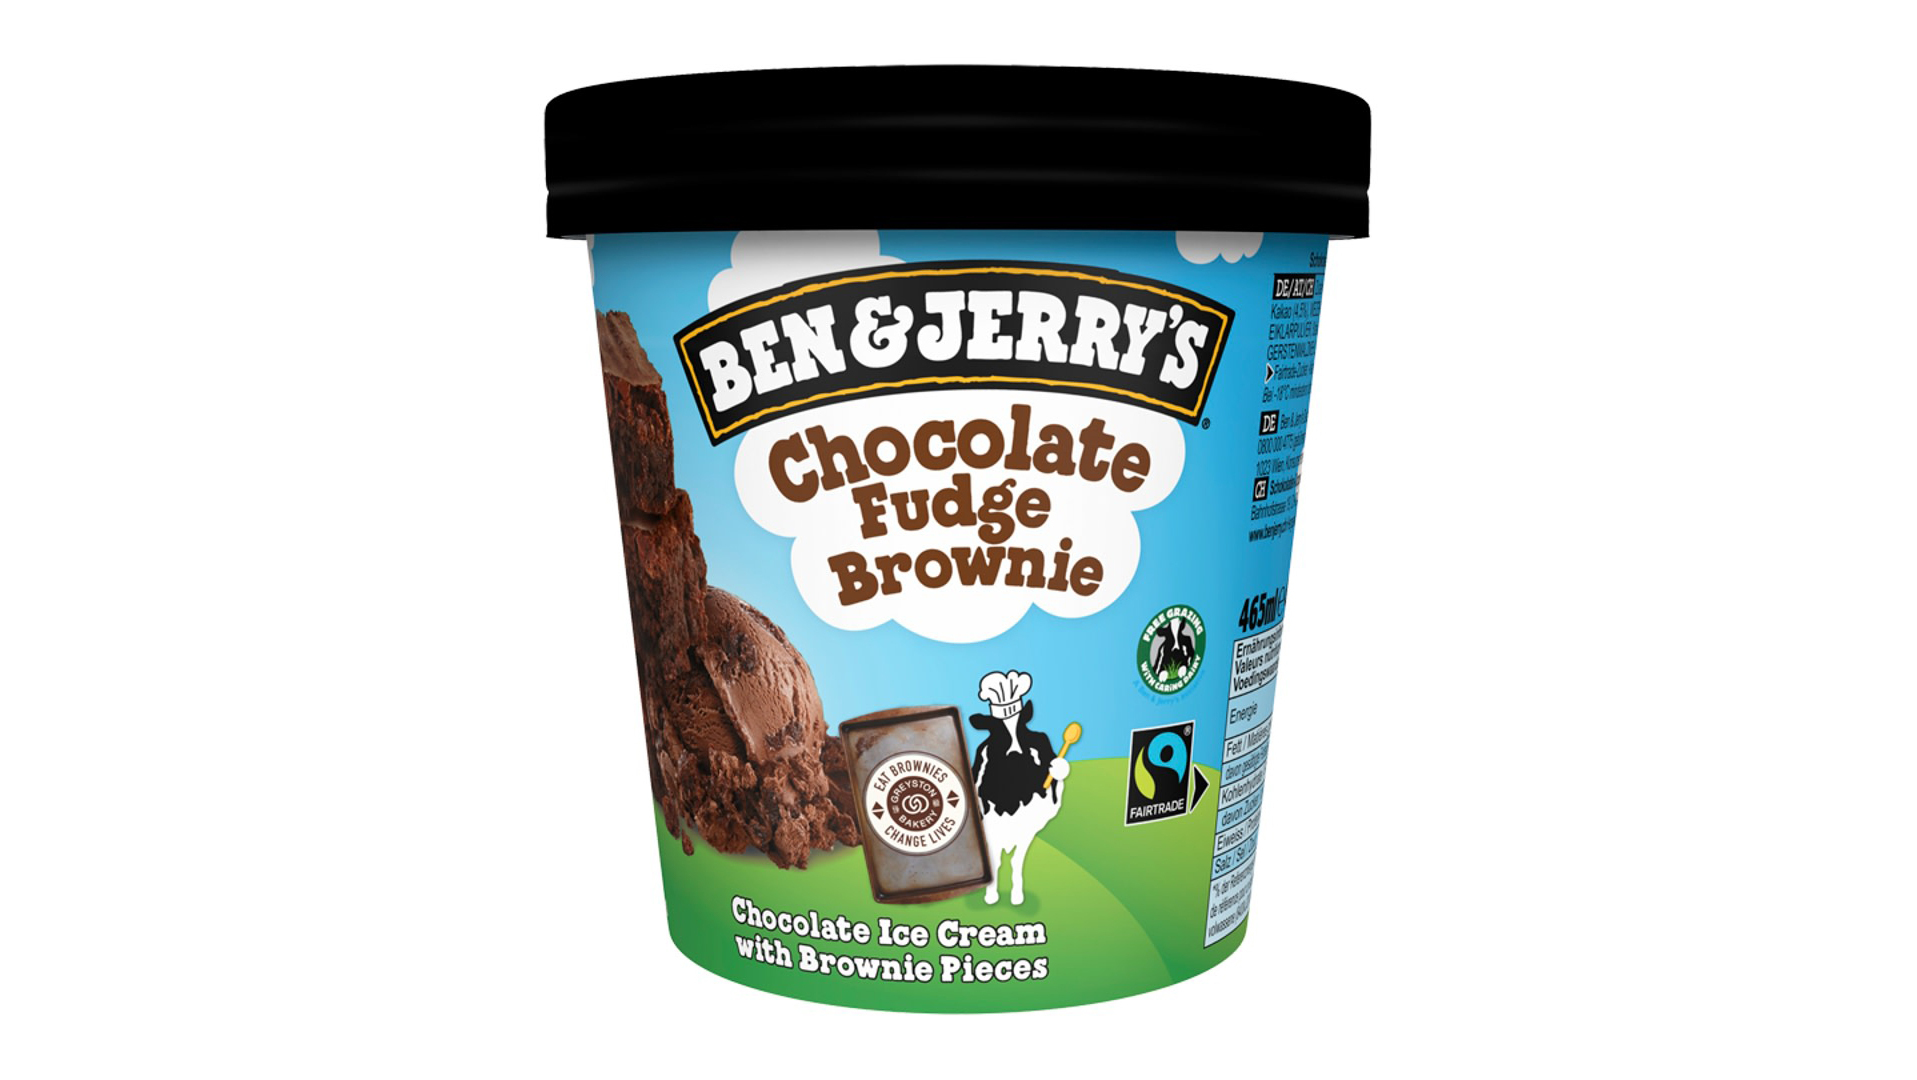 Ben & Jerry's Chocolate Fudge Brownie 500ml - Chicken Delivery in Clayhall IG5